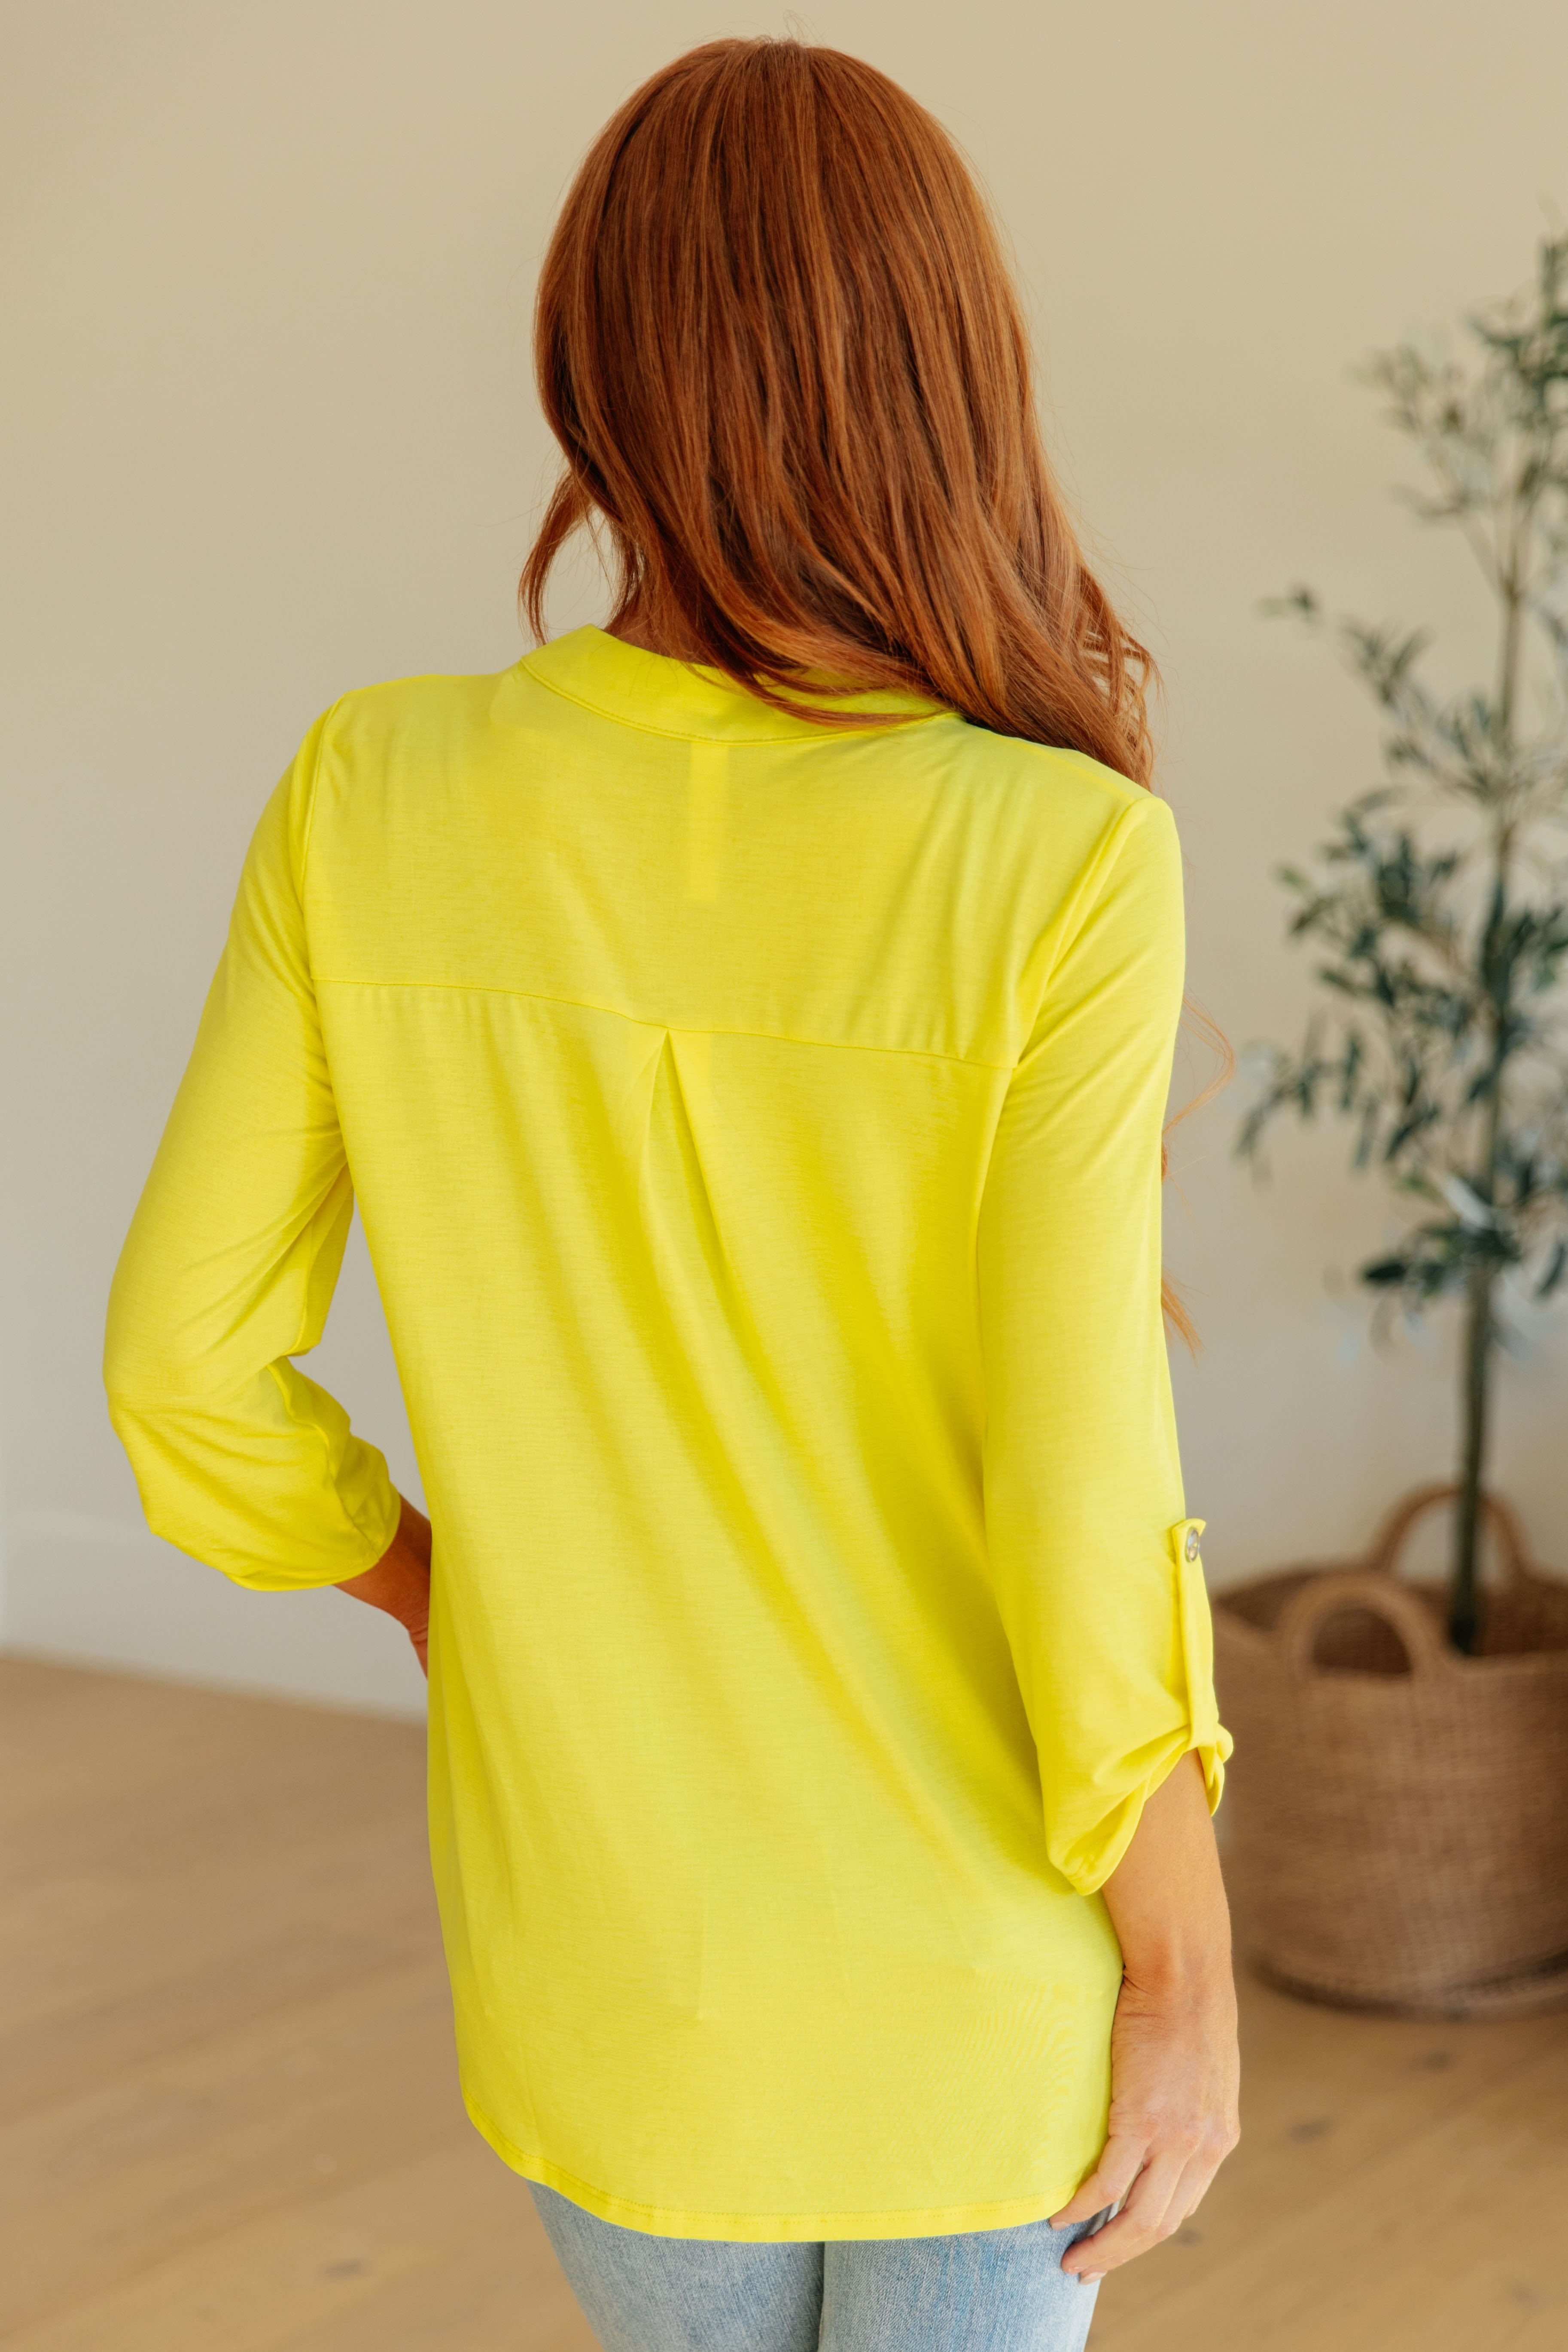 Lizzy Top in Neon Yellow-Womens-Stay Foxy Boutique, Florissant, Missouri